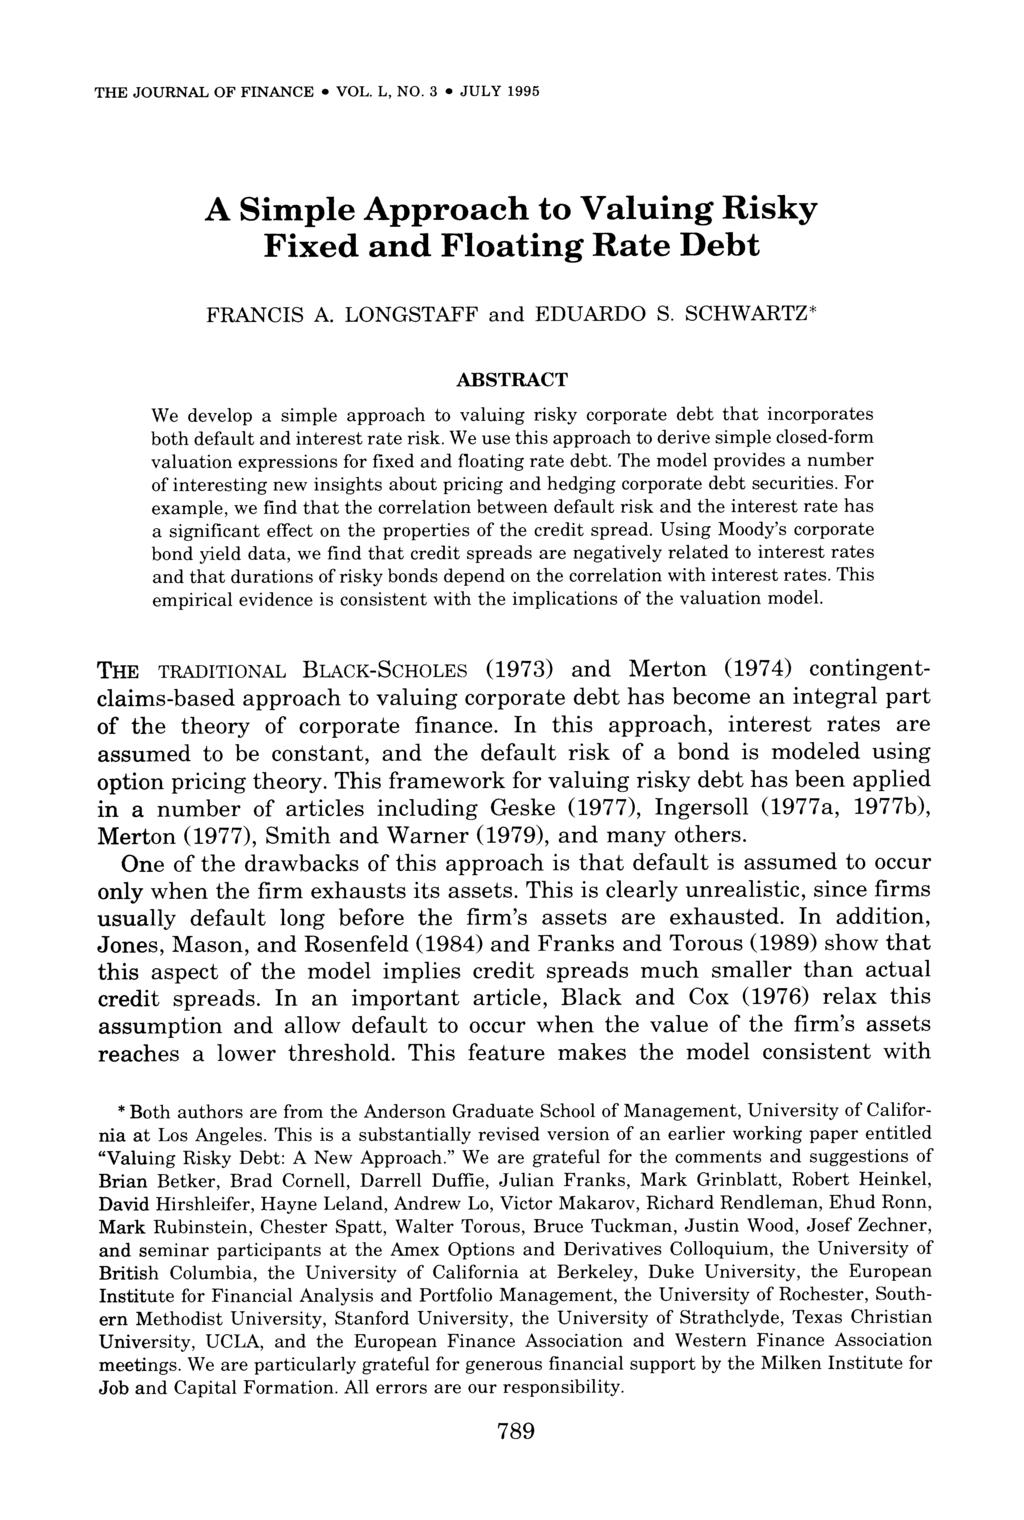 THE JOURNAL OF FINANCE VOL. L, NO. 3 JULY 1995 A Simple Approach to Valuing Risky Fixed and Floating Rate Debt FRANCIS A. LONGSTAFF and EDUARDO S.